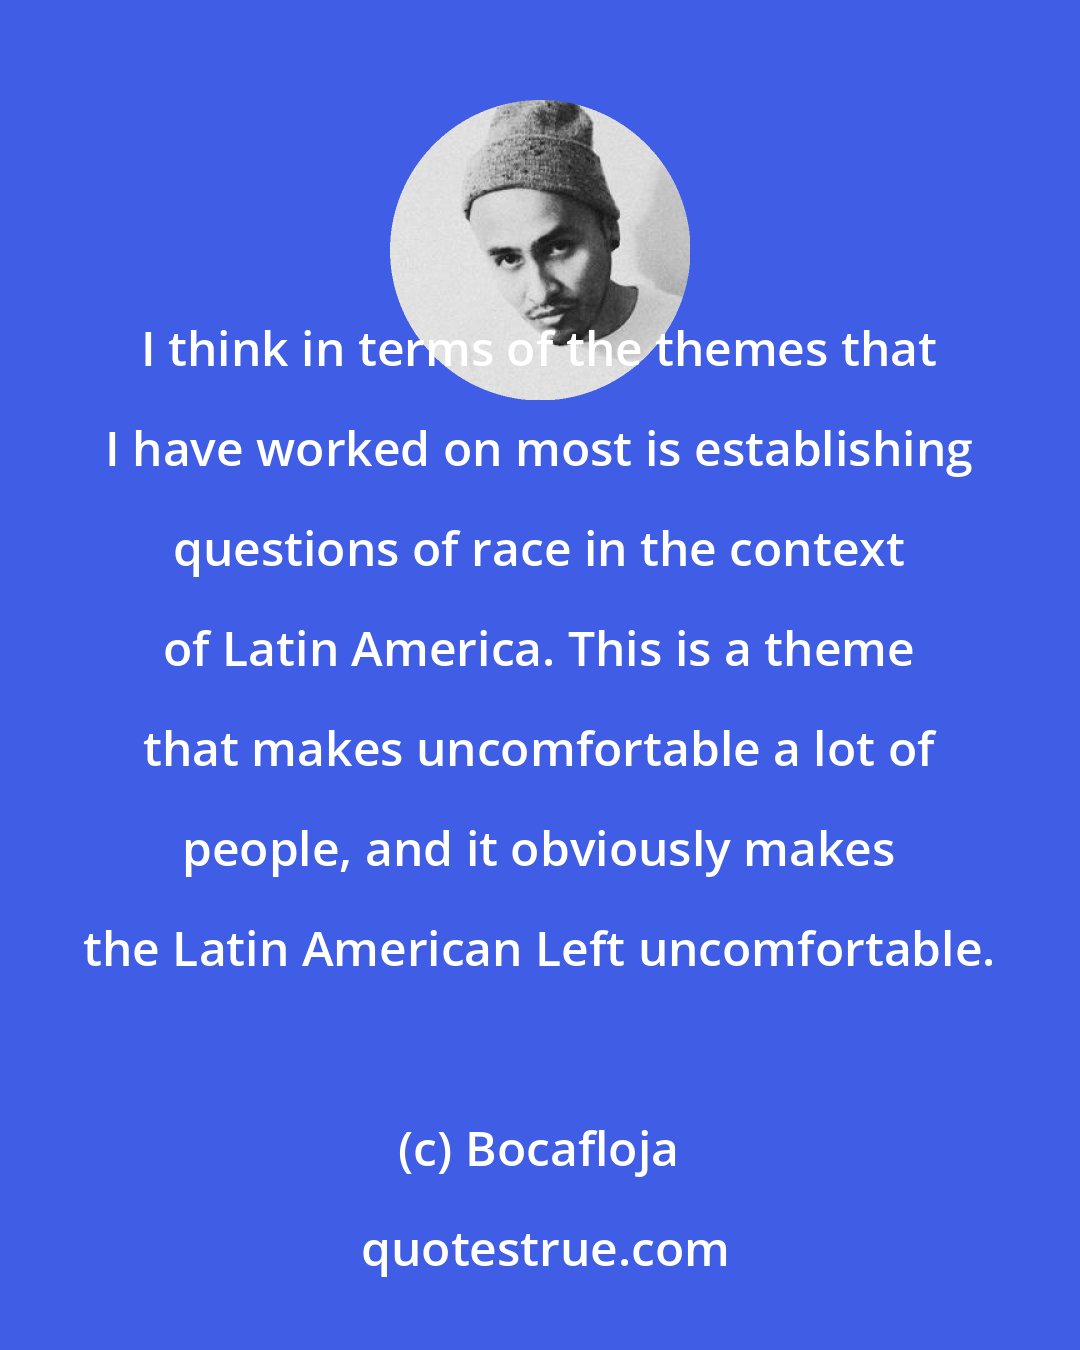 Bocafloja: I think in terms of the themes that I have worked on most is establishing questions of race in the context of Latin America. This is a theme that makes uncomfortable a lot of people, and it obviously makes the Latin American Left uncomfortable.